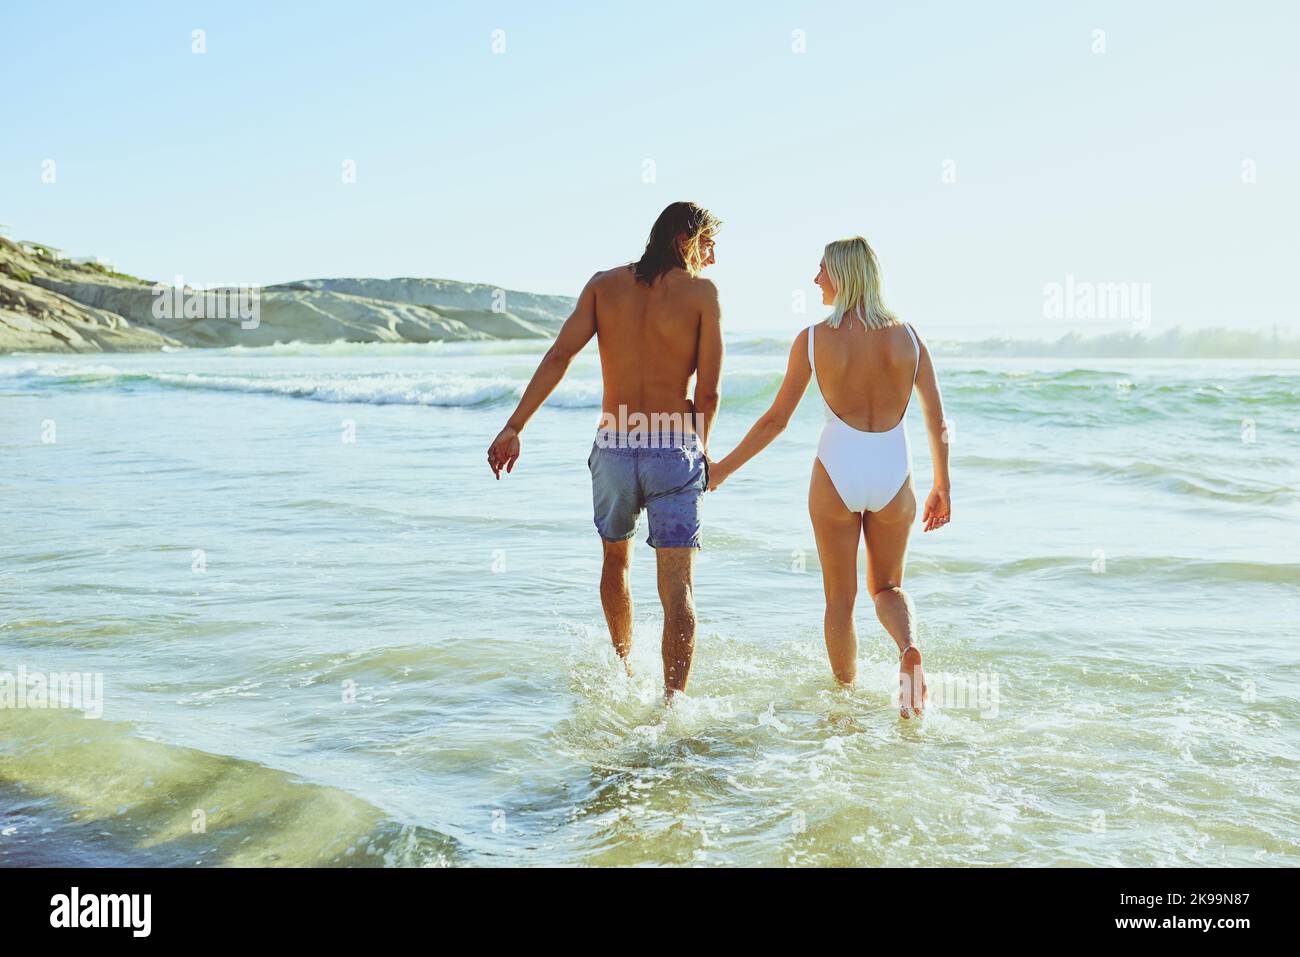 The beach is a place of ultimate joy. Rearview shot of a young couple enjoying some quality time together at the beach. Stock Photo